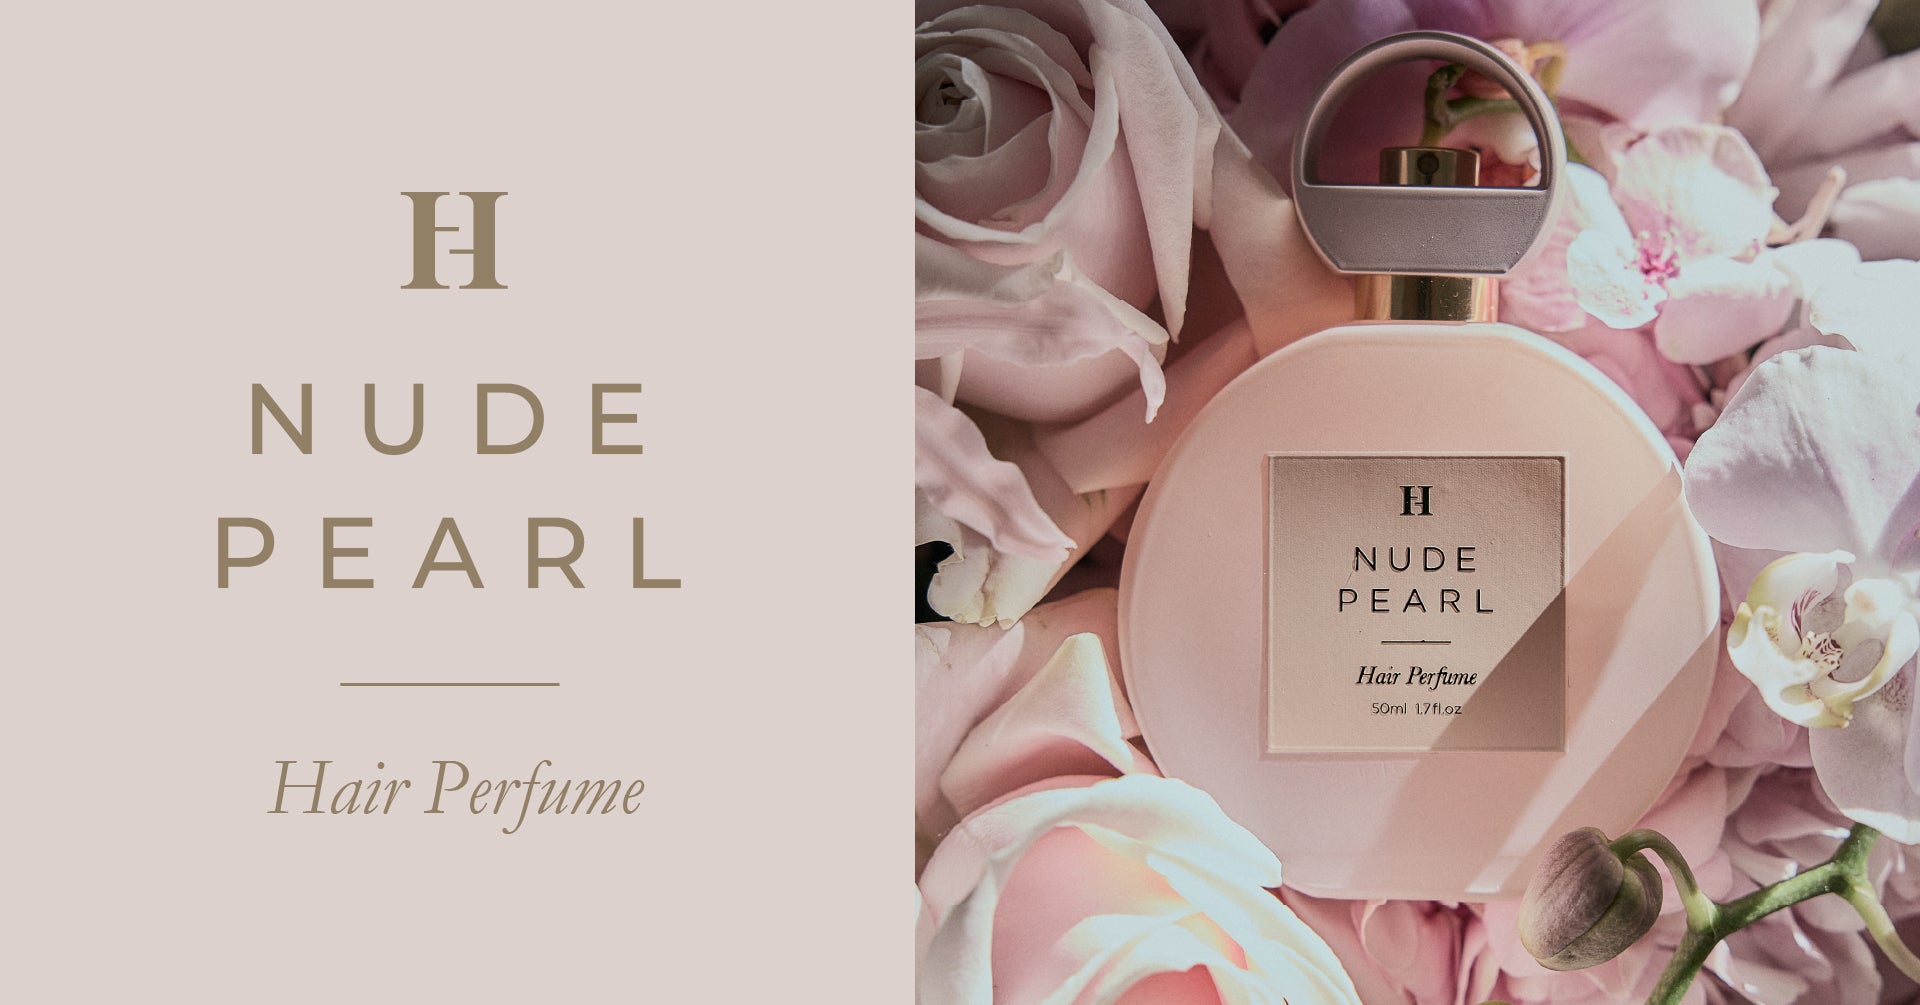 「Her lip to BEAUTY」から魅力的な香りをまとえる「Hair Perfume - NUDE PEARL -」が発売開始！